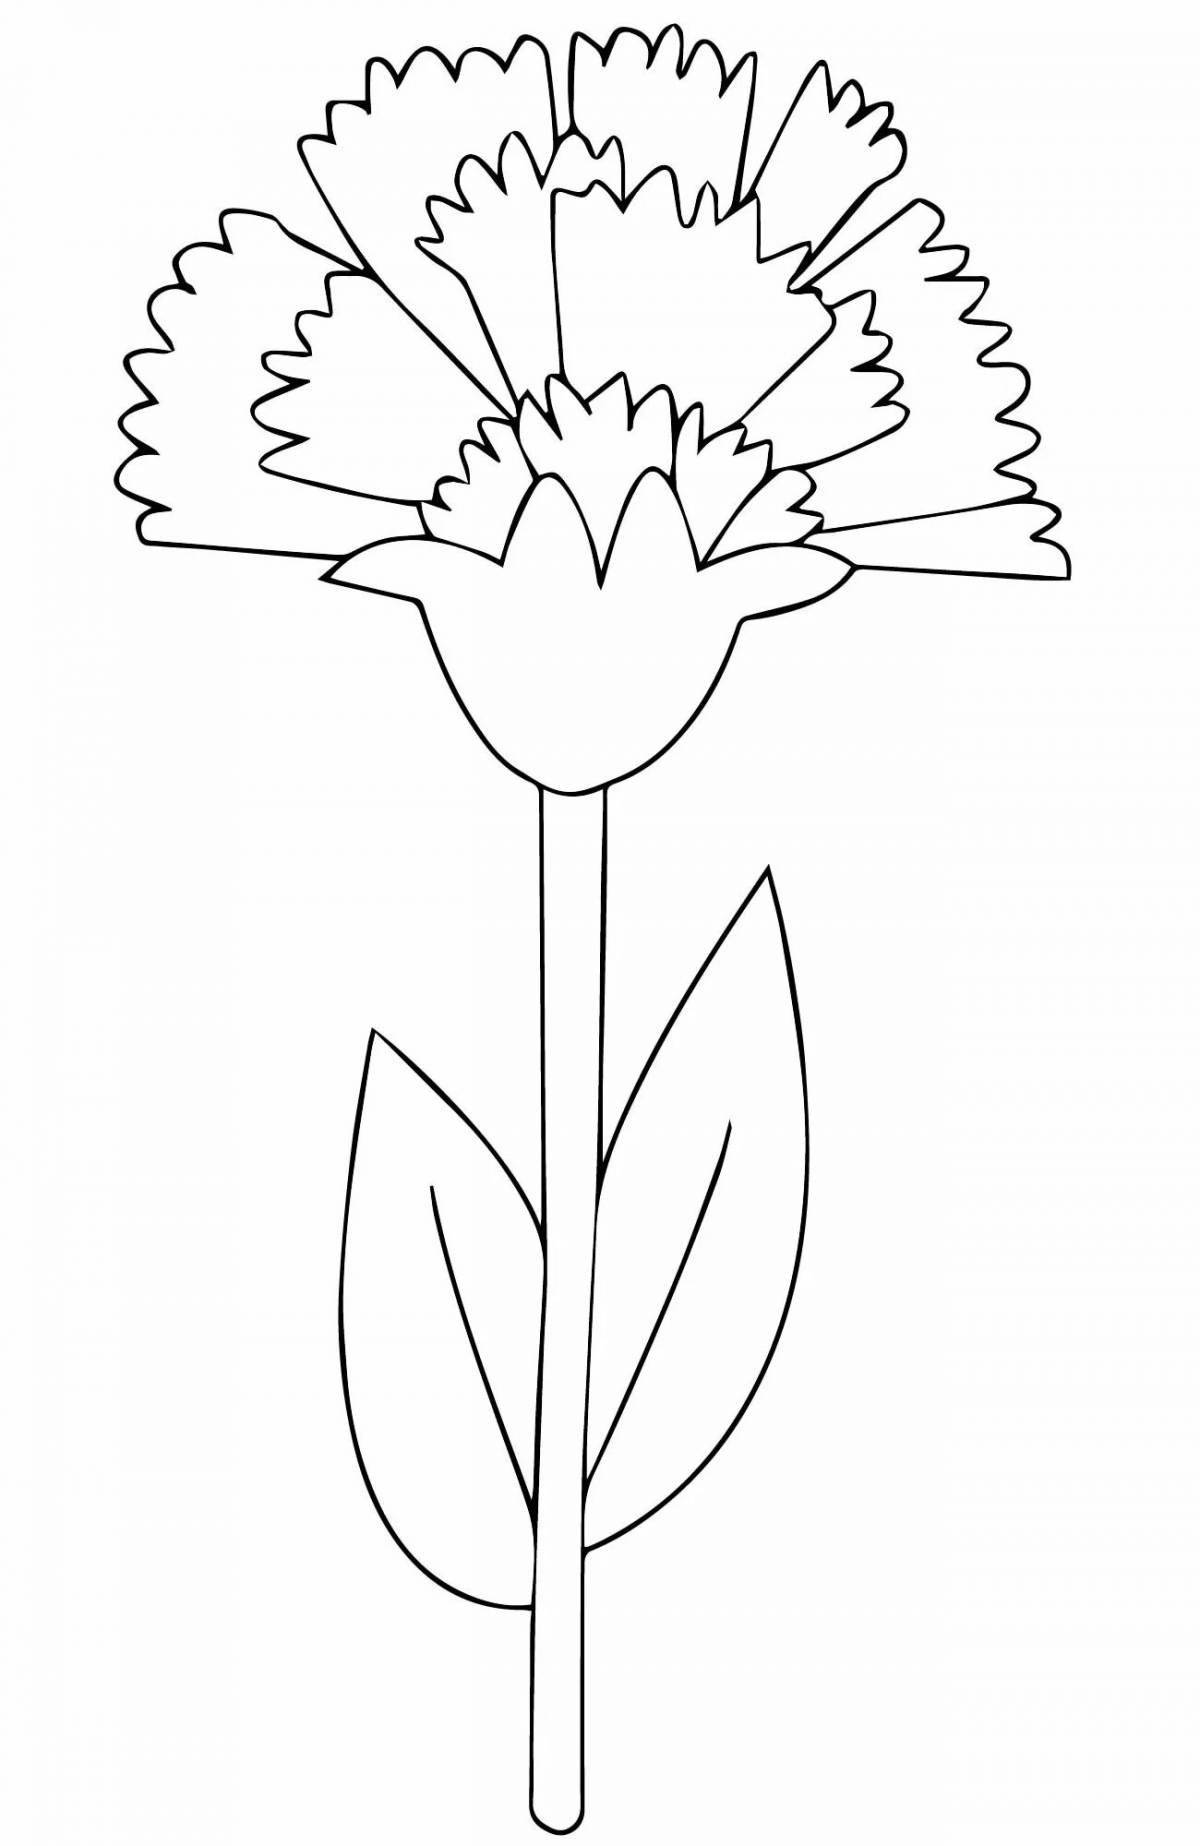 Fancy carnation coloring page